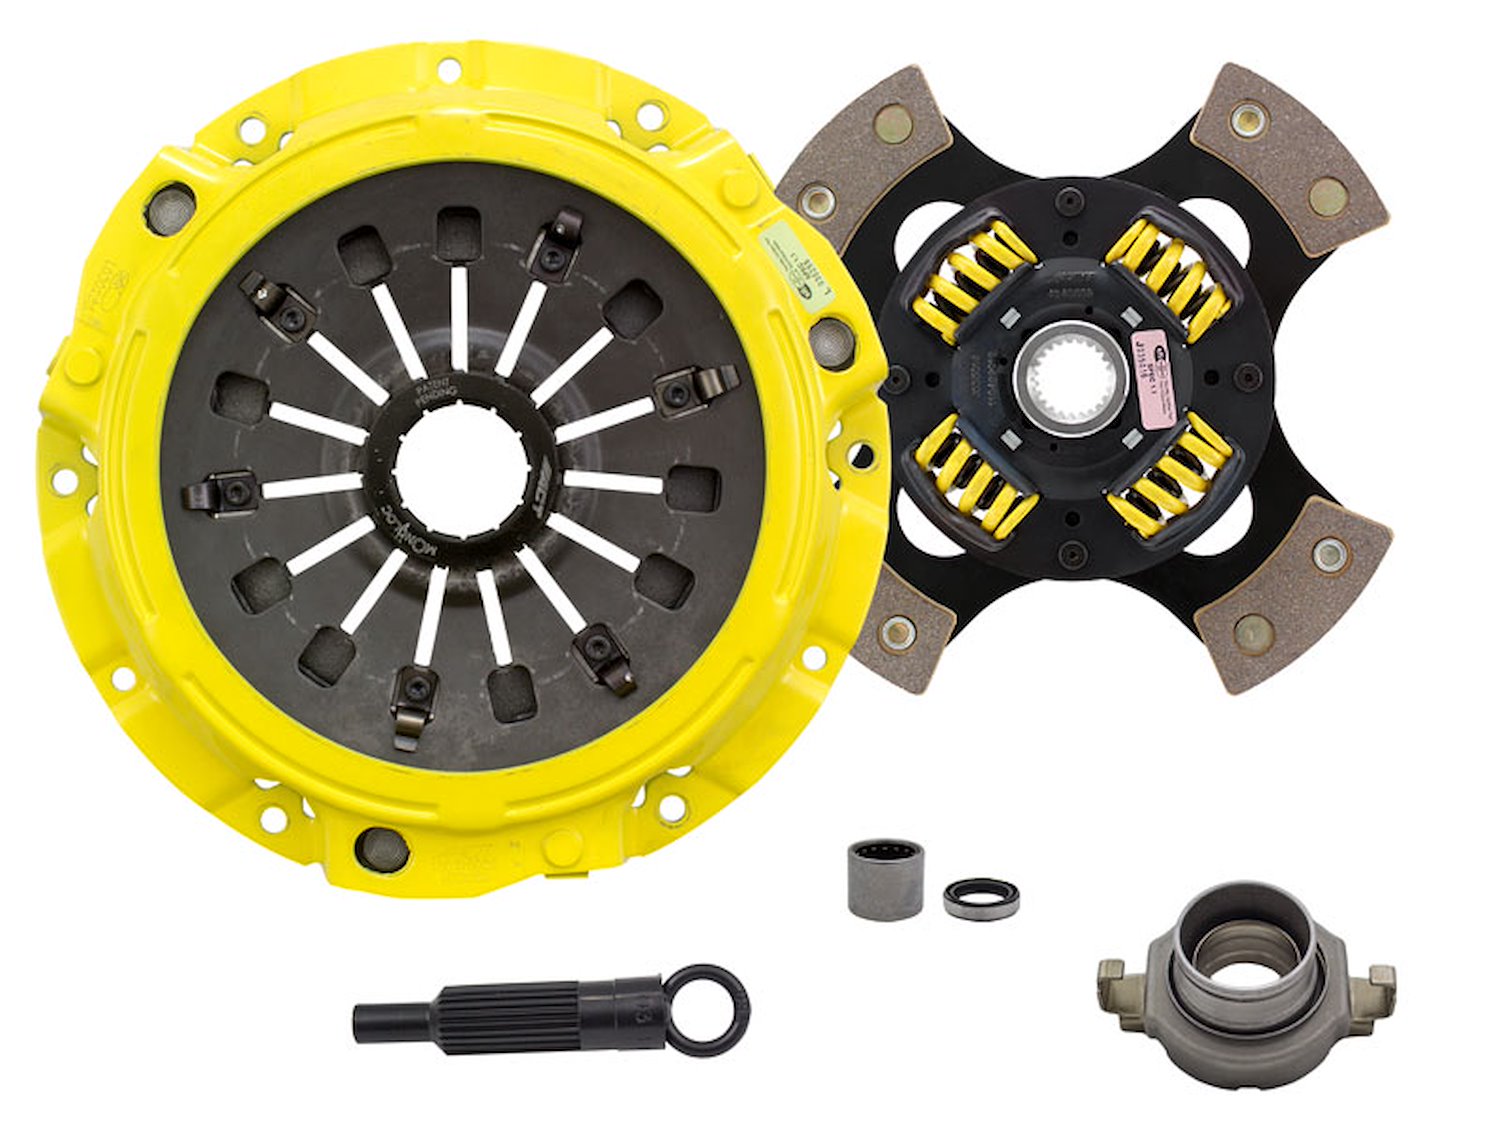 XT-M/Race Sprung 4-Pad Transmission Clutch Kit Fits Select Ford/Lincoln/Mercury/Mazda